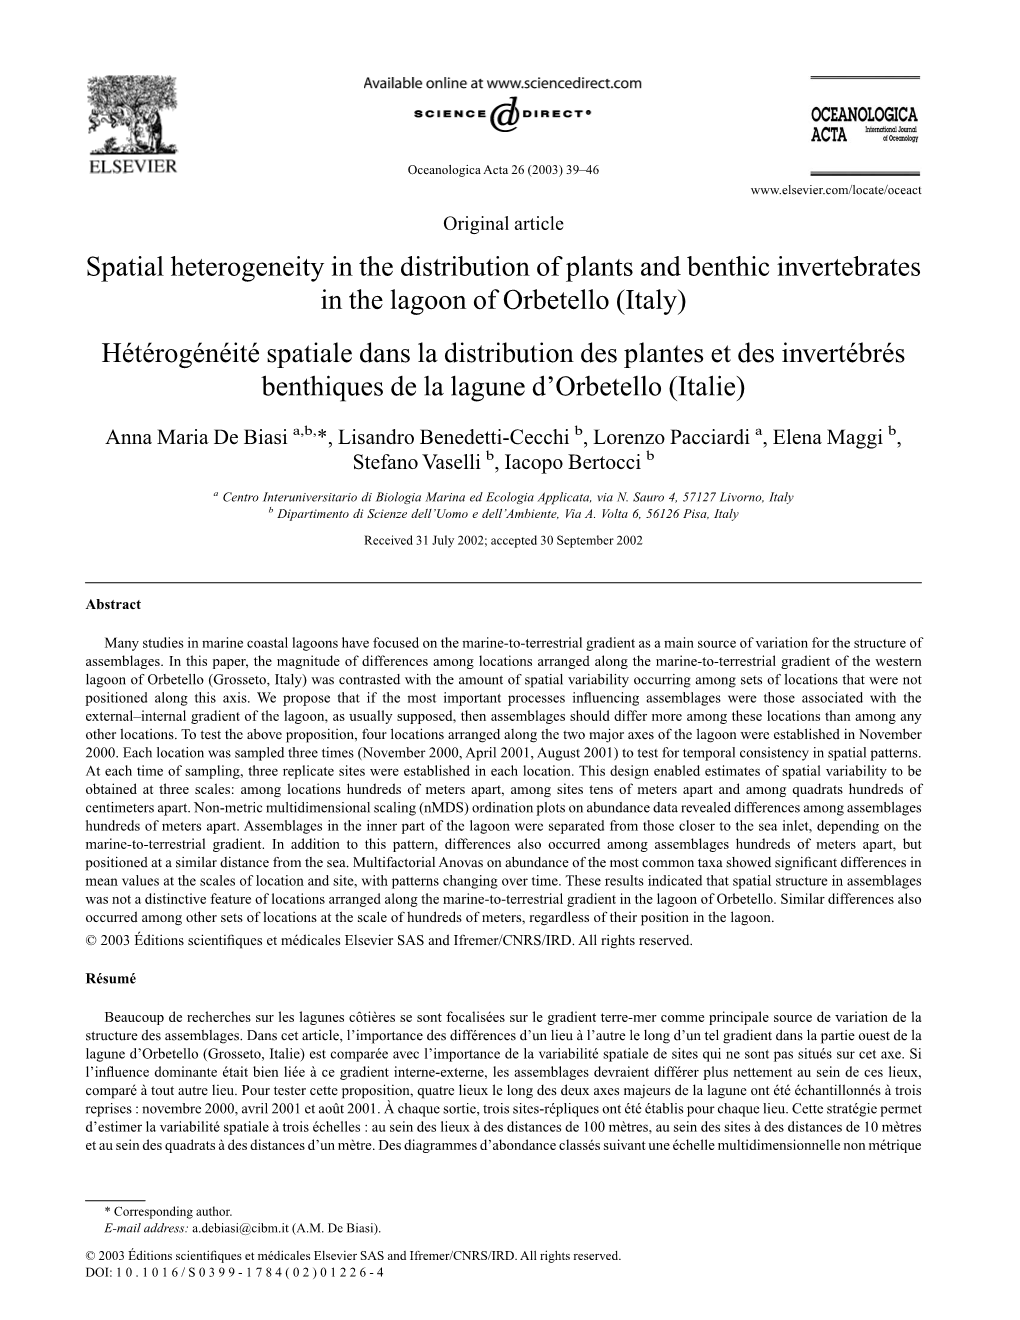 Spatial Heterogeneity in the Distribution of Plants And